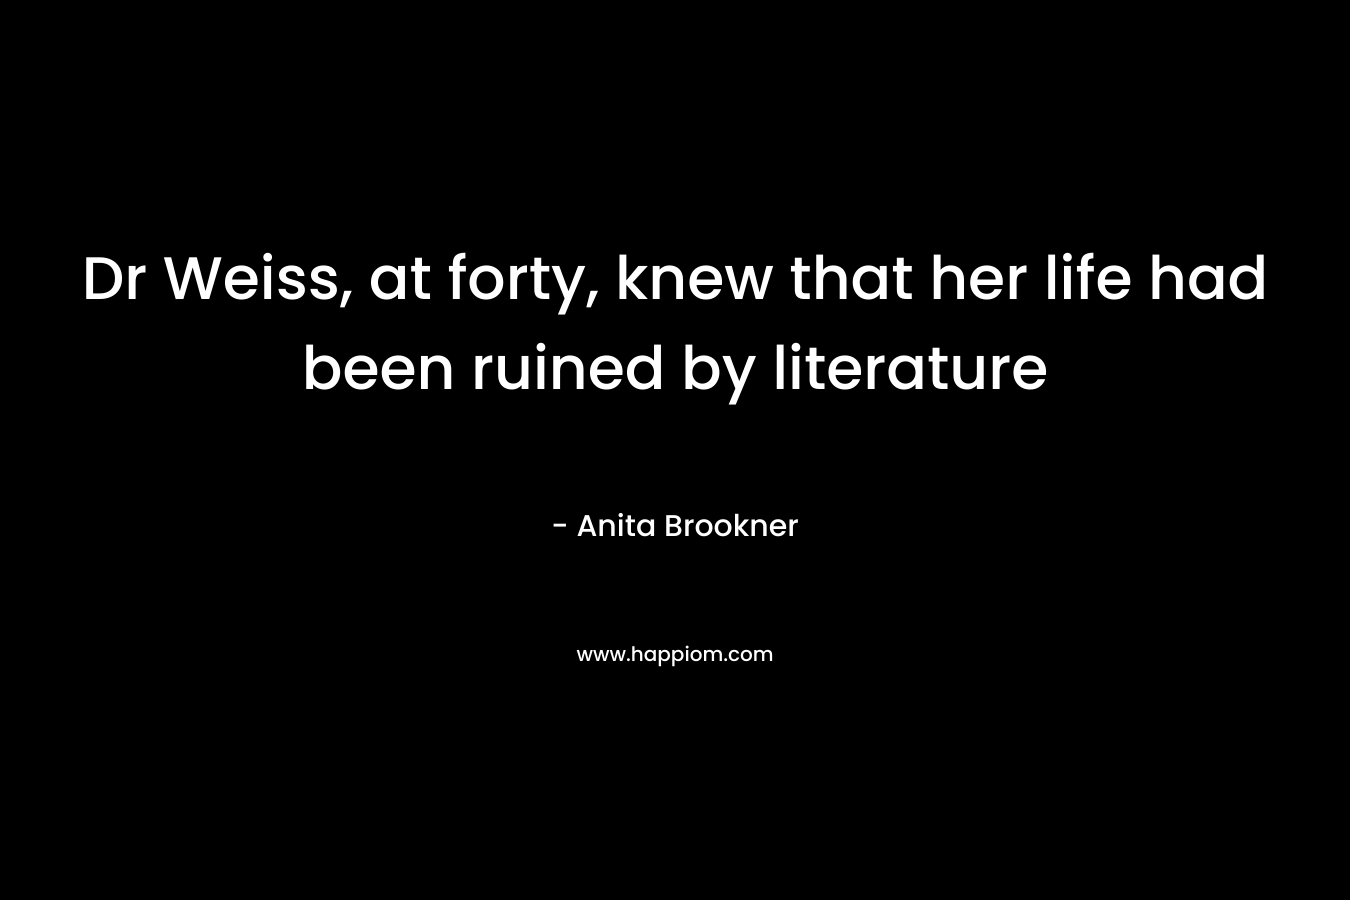 Dr Weiss, at forty, knew that her life had been ruined by literature – Anita Brookner